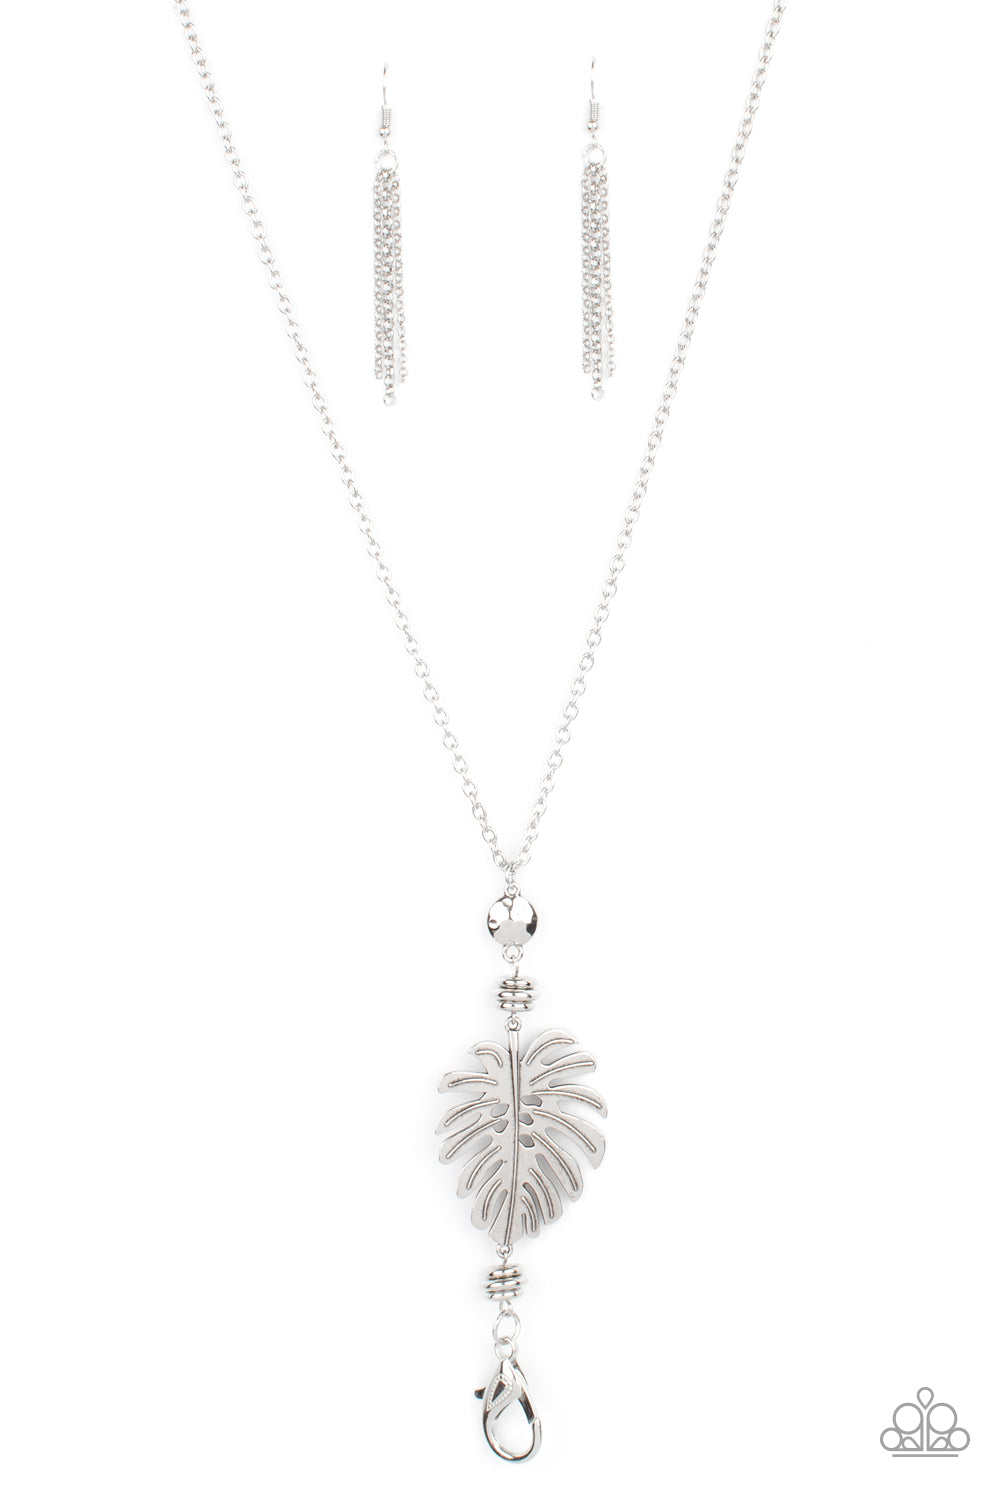 silver, silver jewelry, necklace, long necklace, affordable jewelry, affordable holiday gift, everyday jewelry, paparazzi accessories, jewelry stores, jewelry stores near me, tax free jewelry, leaf, leaf jewelry,